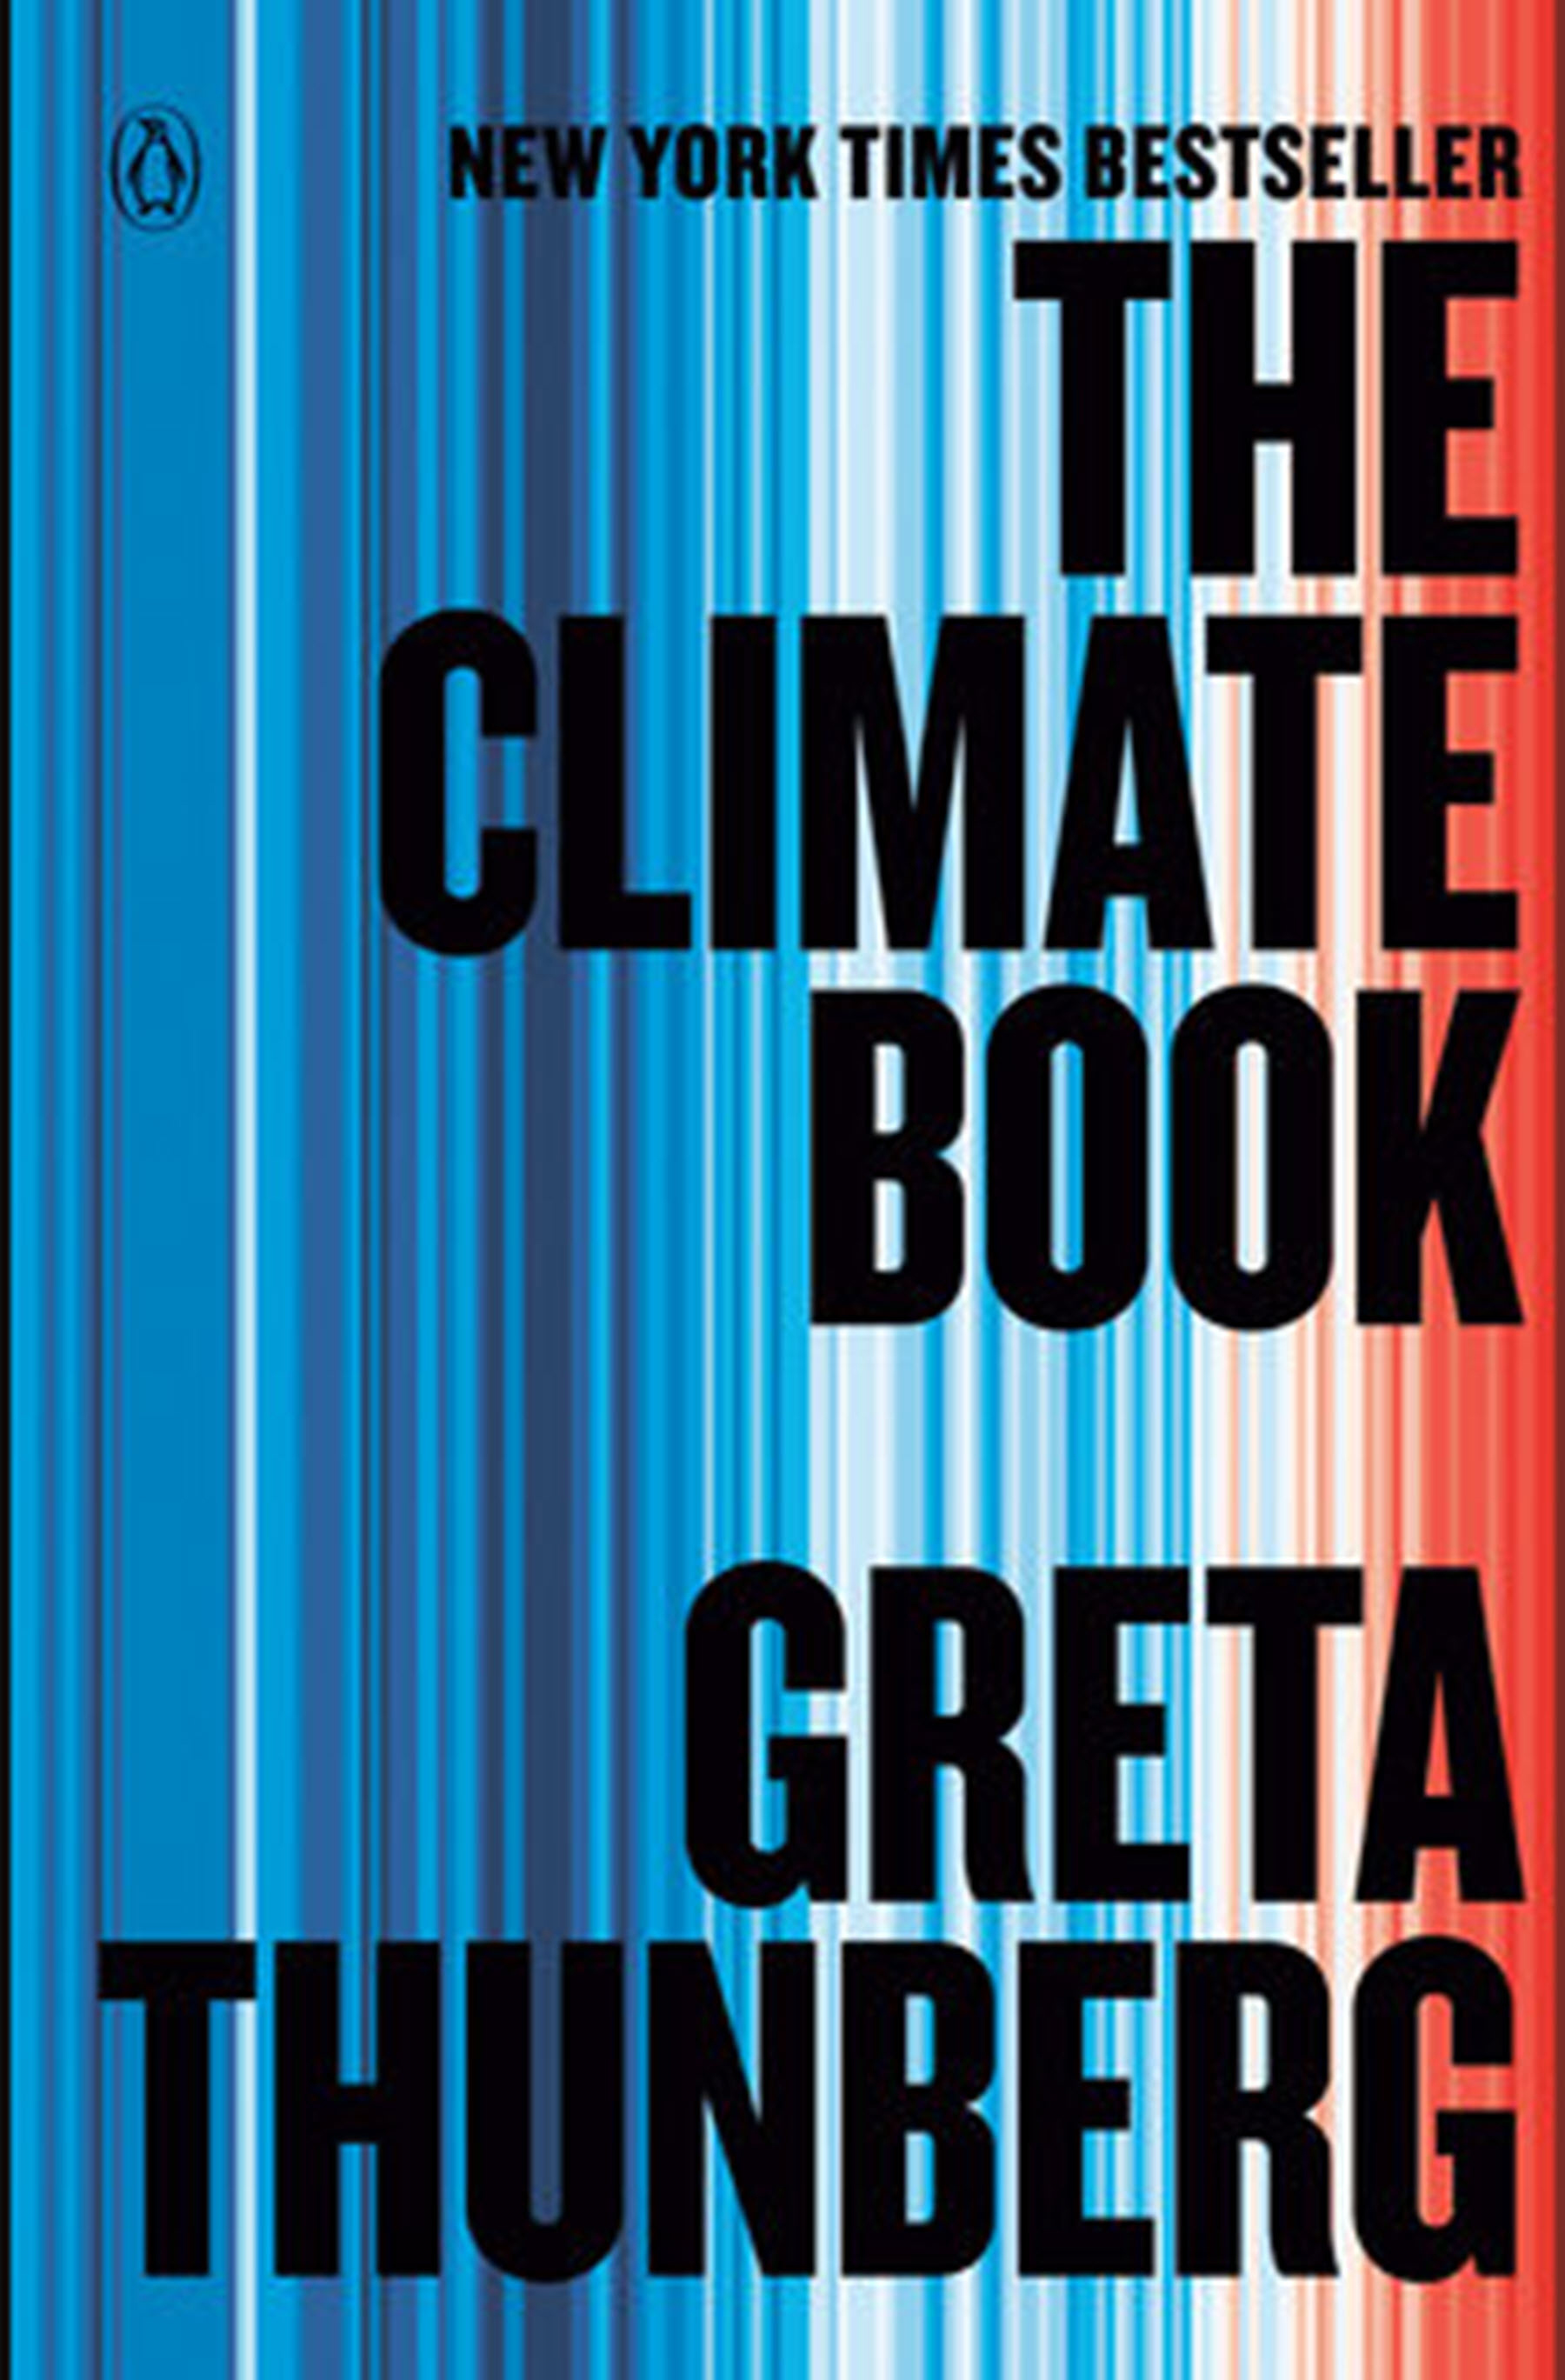 image depicting book cover